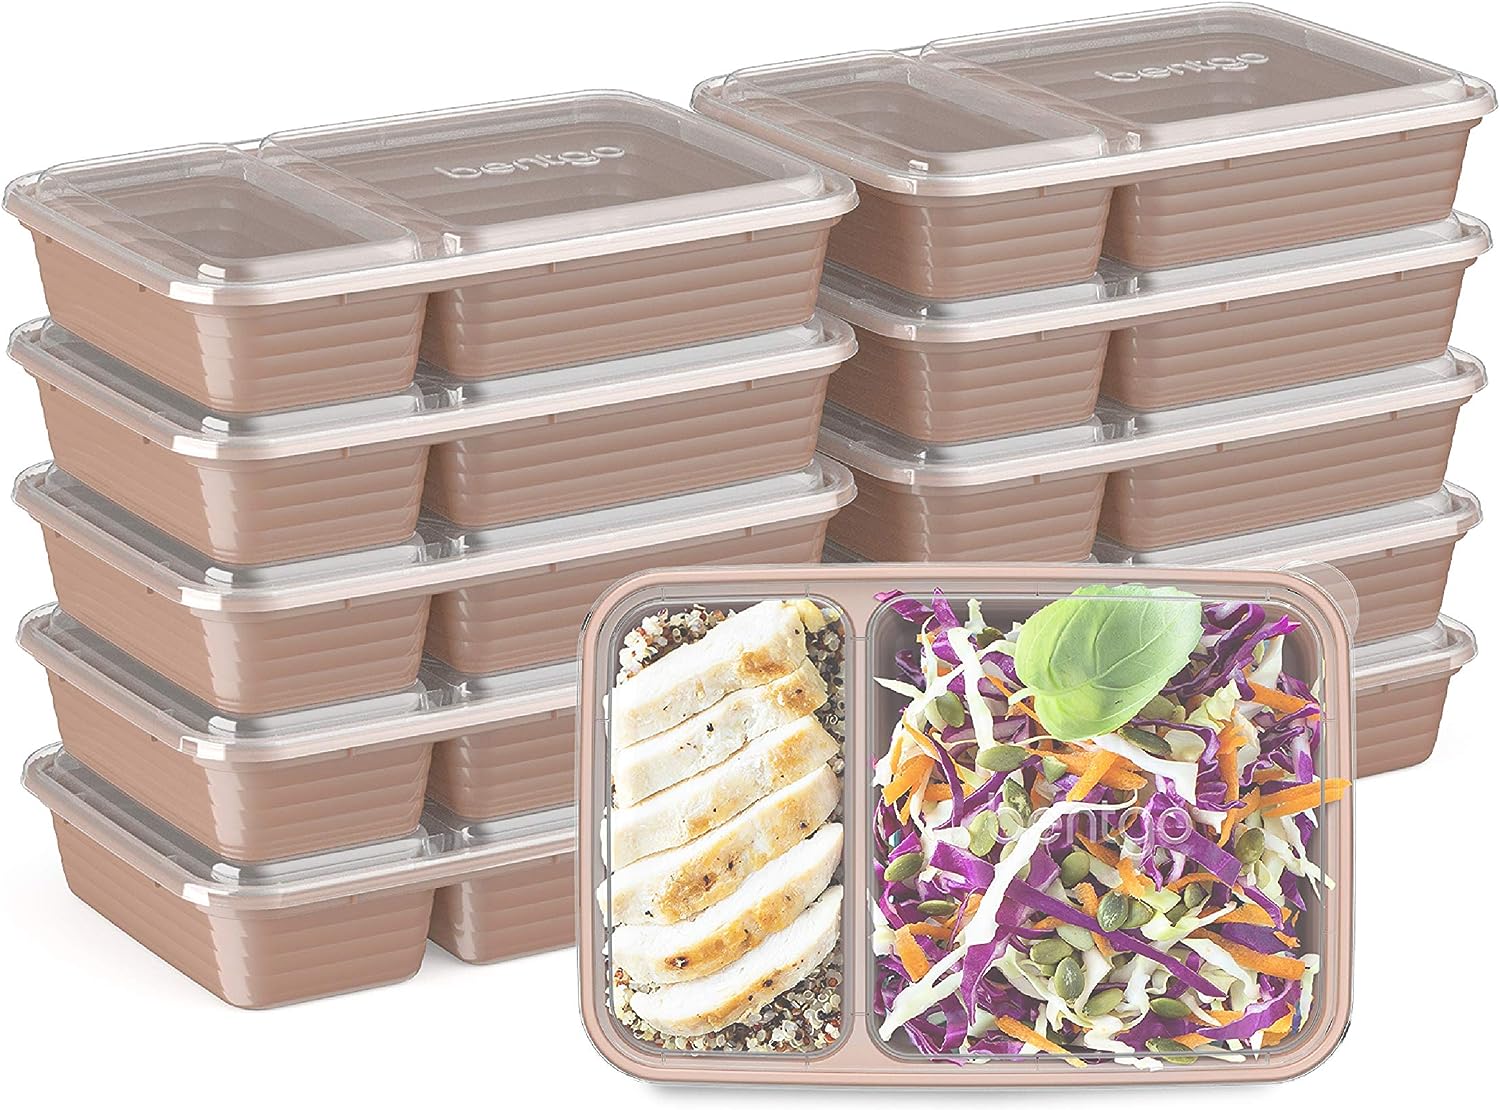 https://storables.com/wp-content/uploads/2023/08/14-superior-freezer-containers-with-lids-bpa-free-for-2023-1691050674.jpg